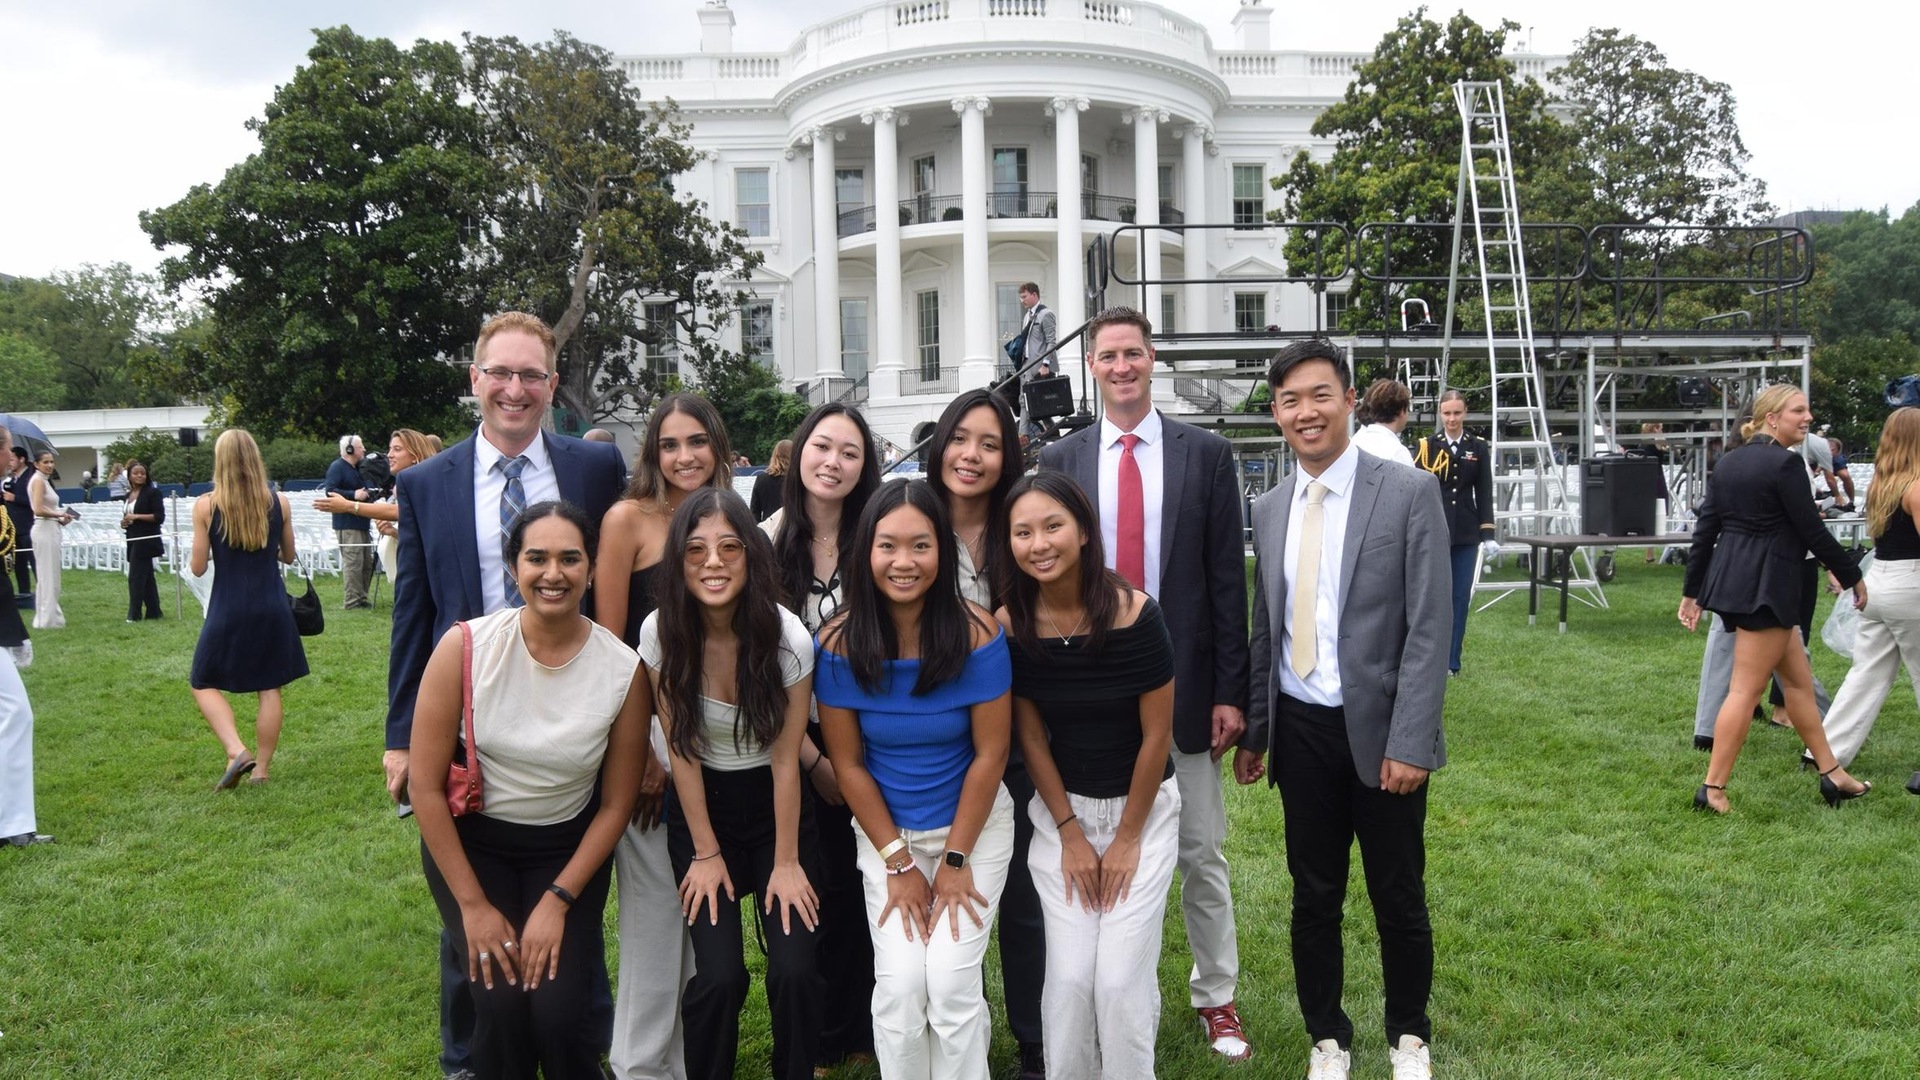 Women’s Golf Travels to White House College Champions Day